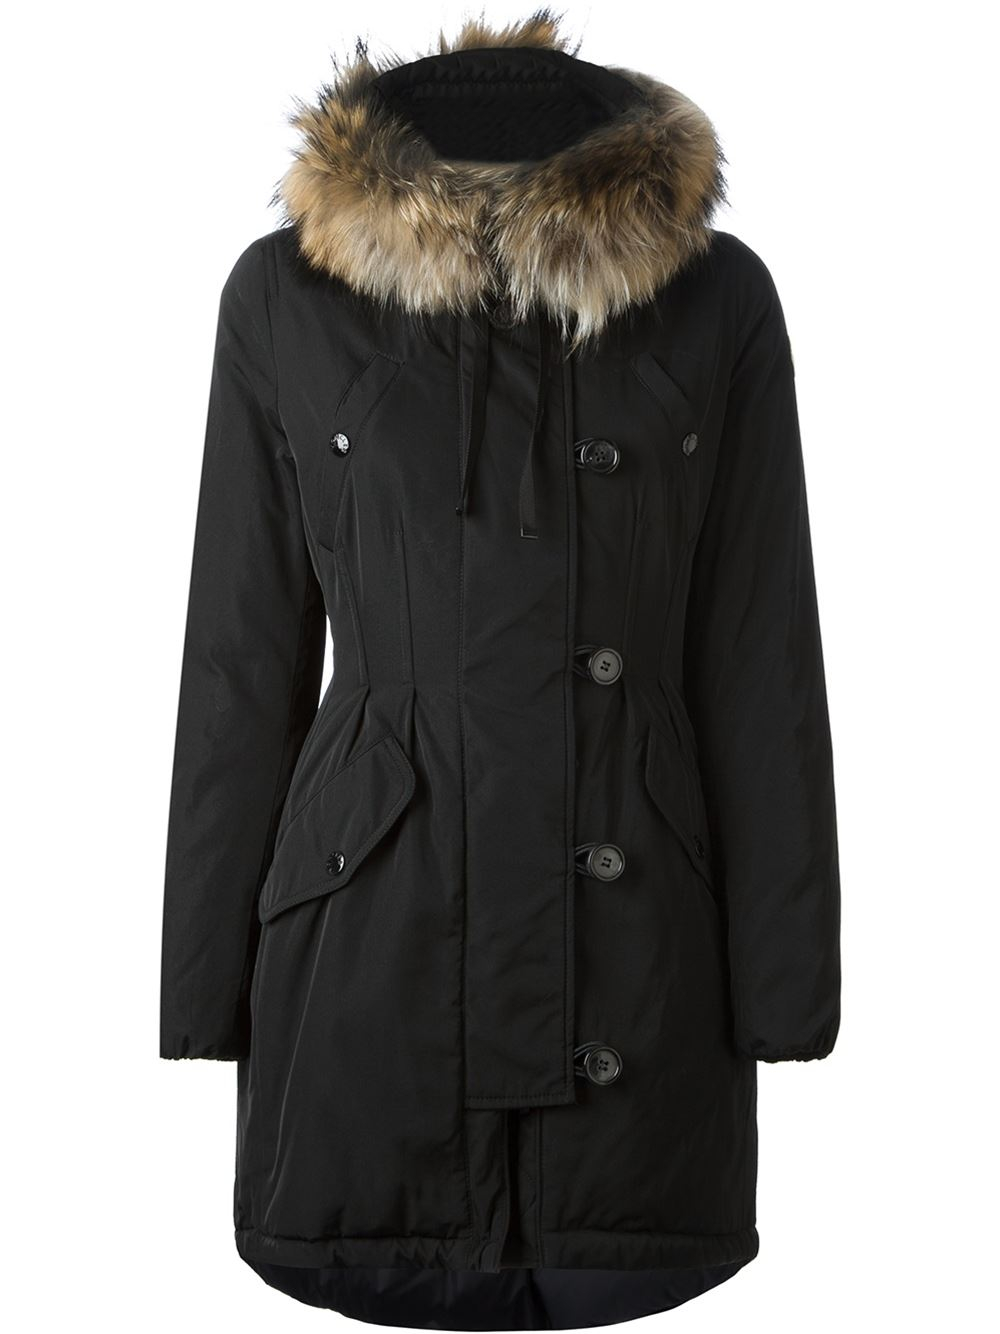 Moncler Arrious Padded Parka in Black - Lyst